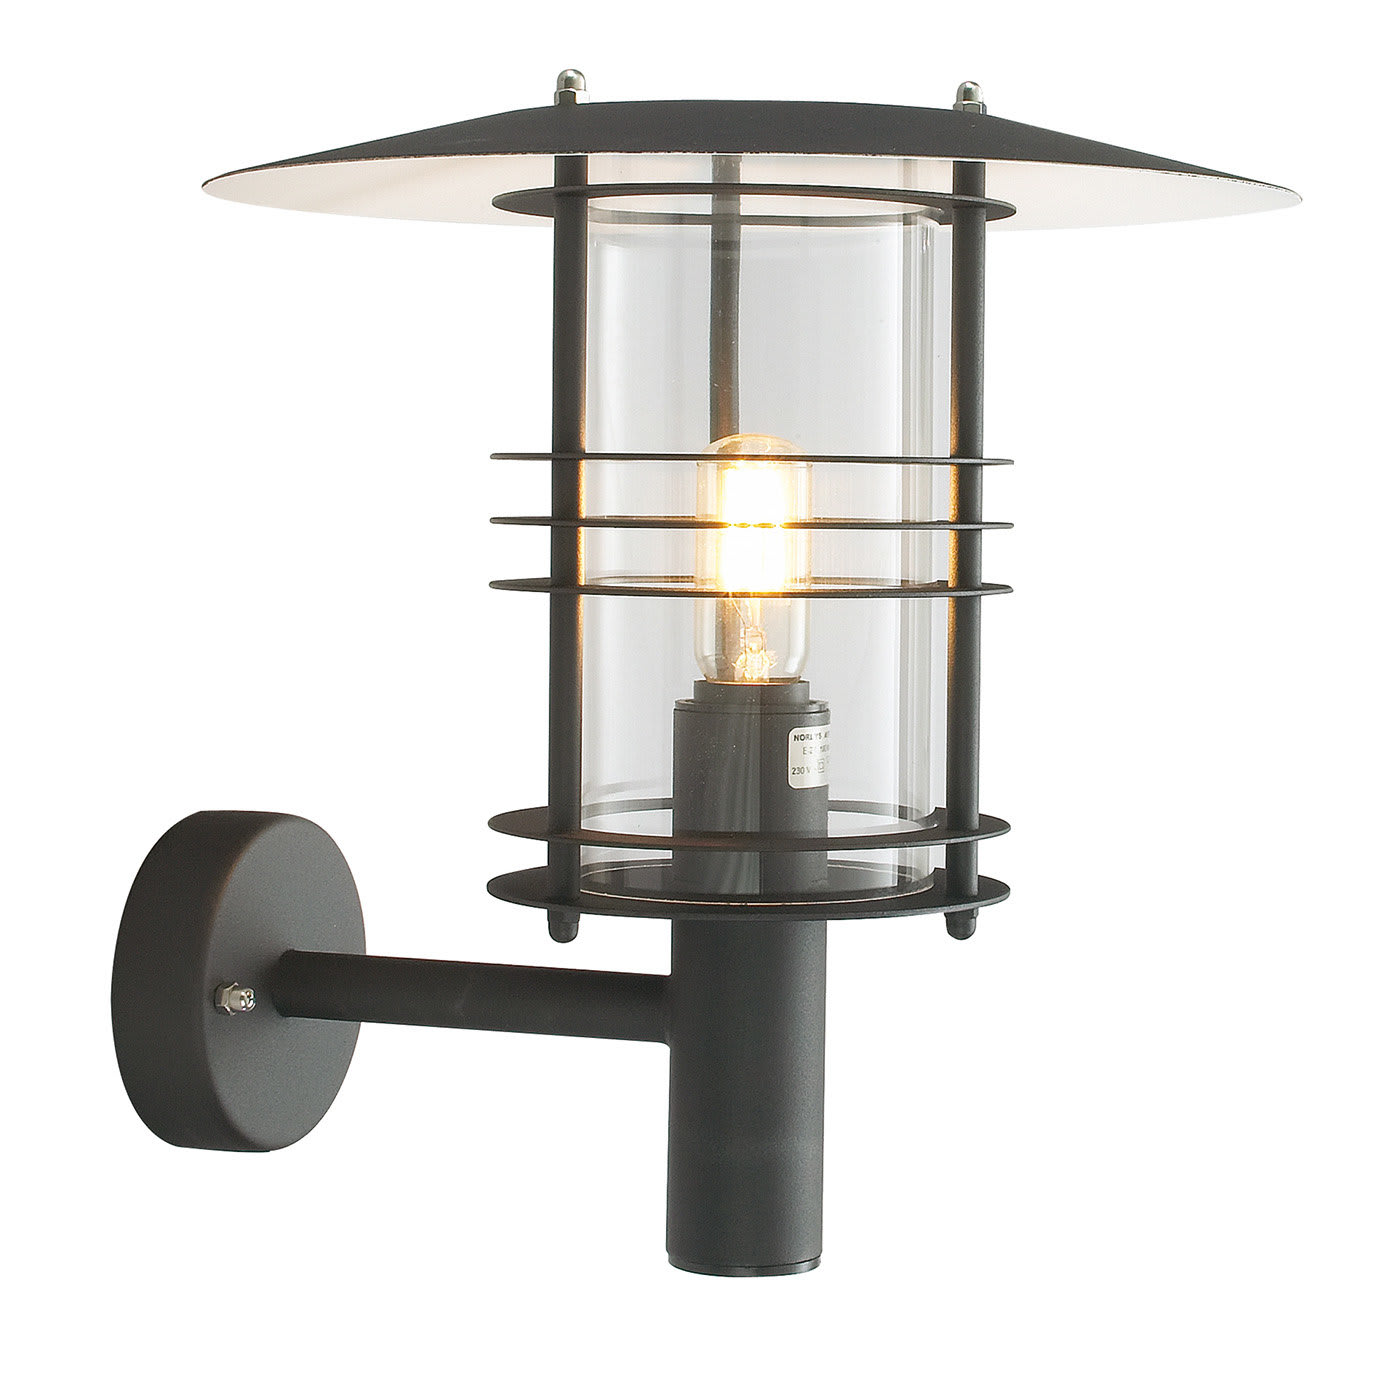 Stockholm Galvanized Wall Lamp - Norlys